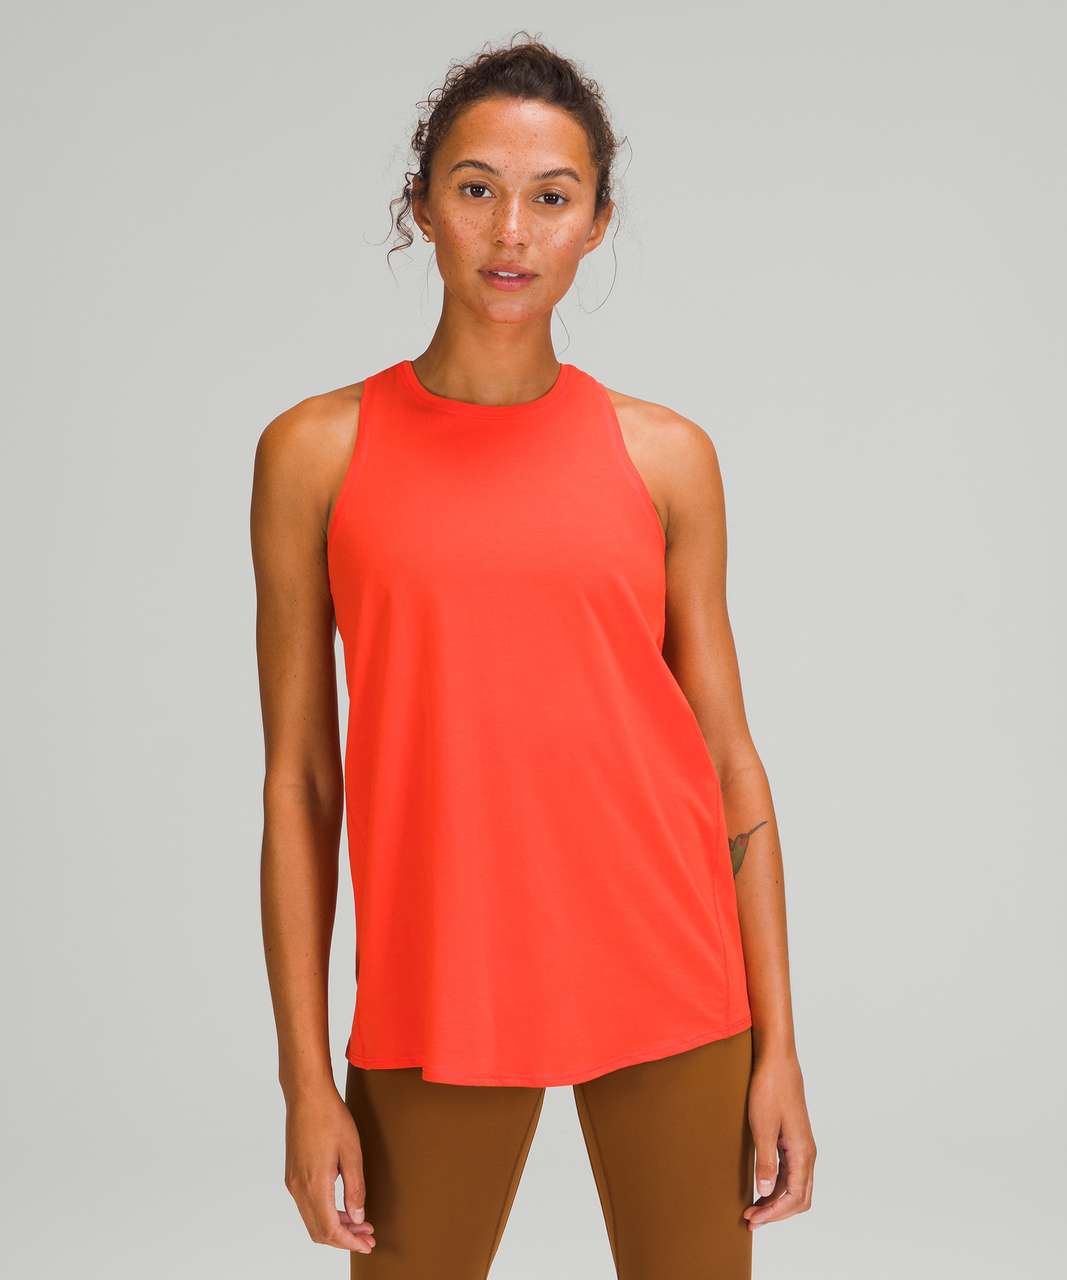 Lululemon All Tied Up Tank Top - Autumn Red